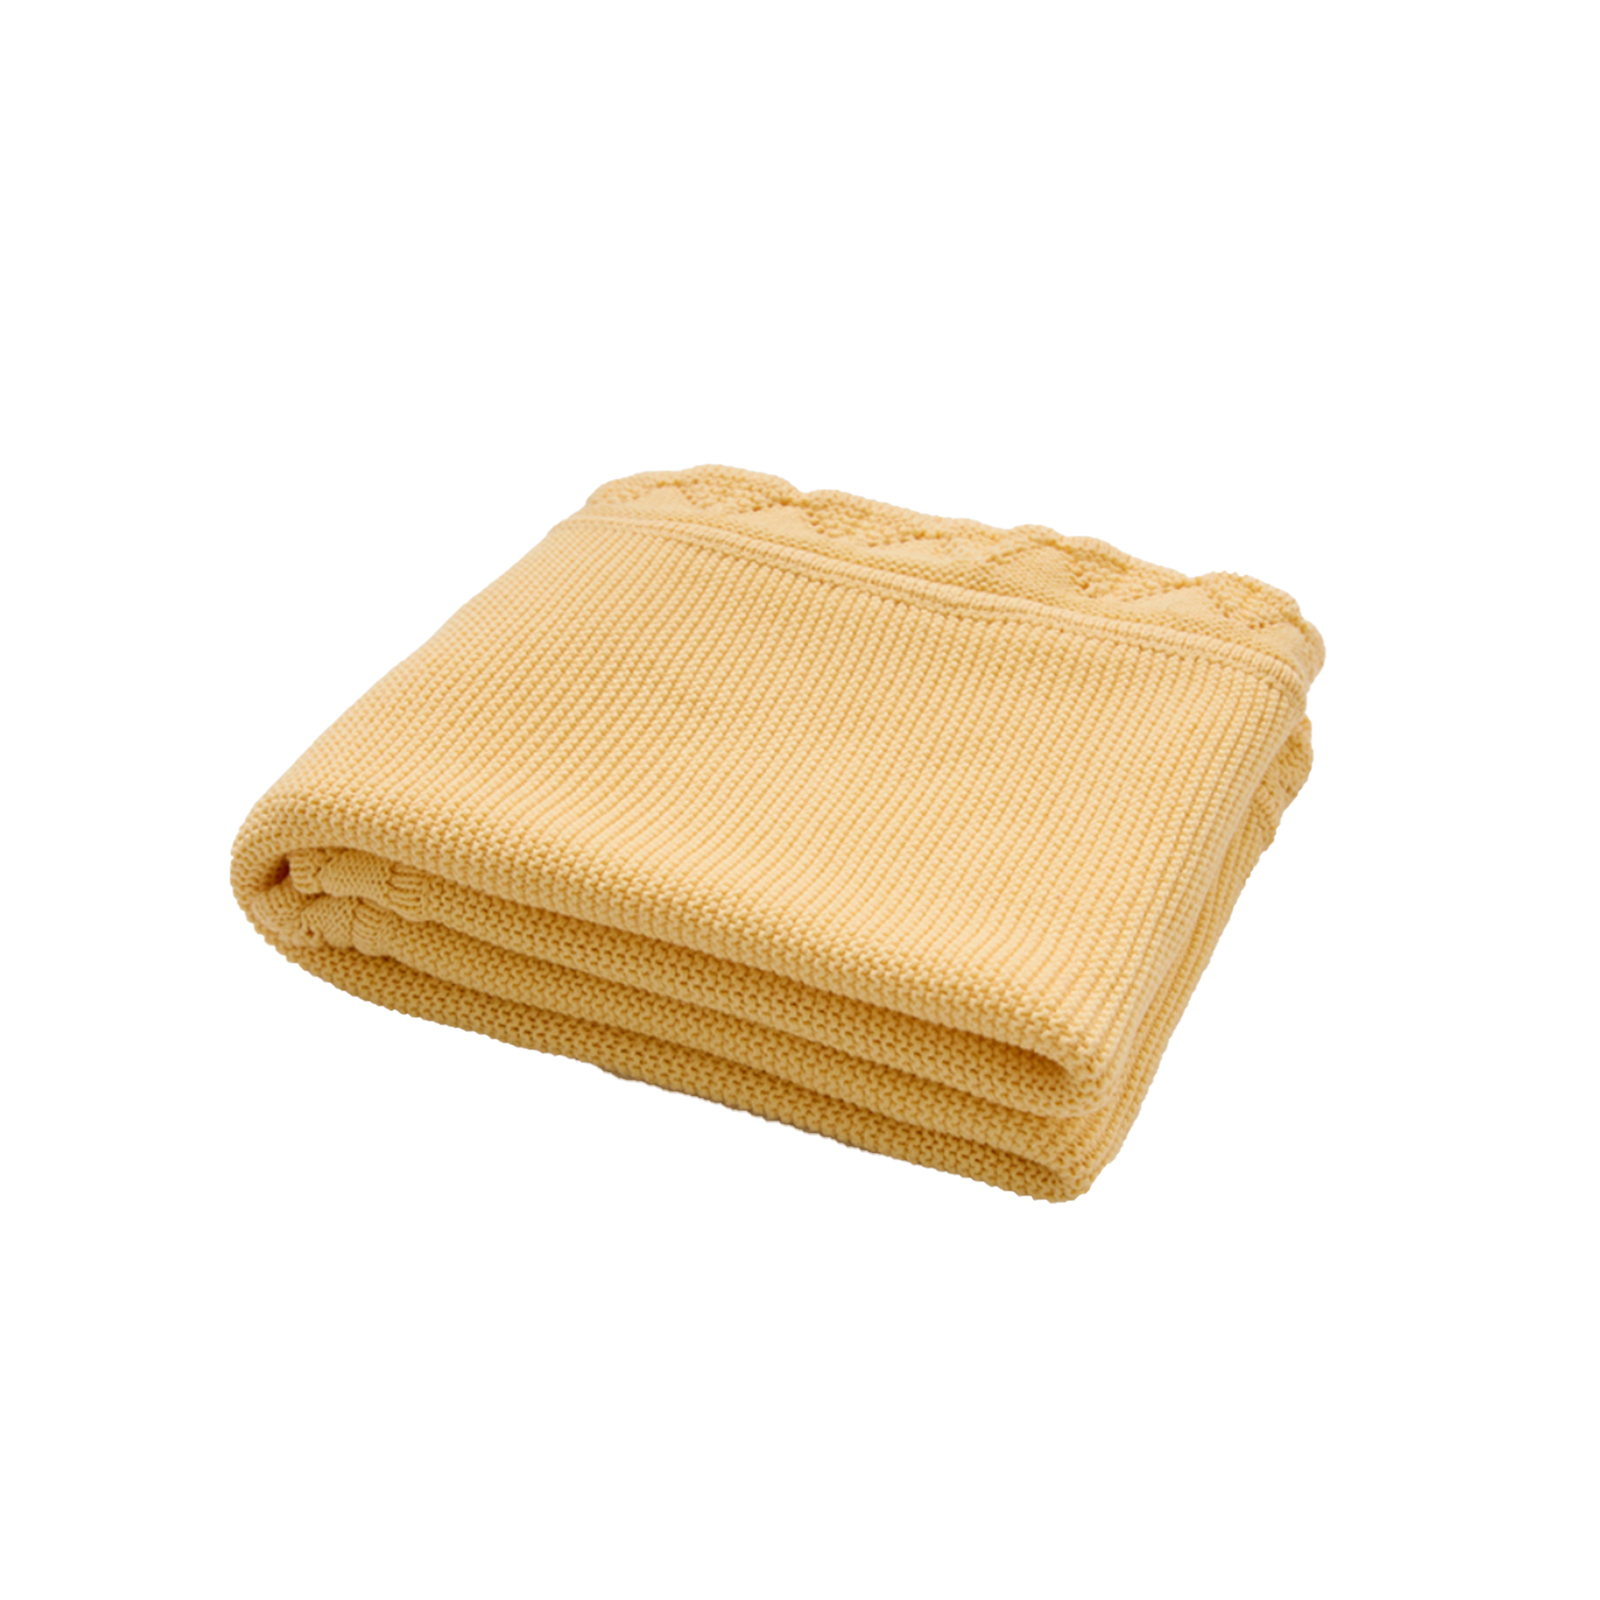 Solid Color Knitted Blanket Lightweight Comfortable Breathable Machine Washable Super Soft Throw Blanket lemon yellow 80 x 100CM